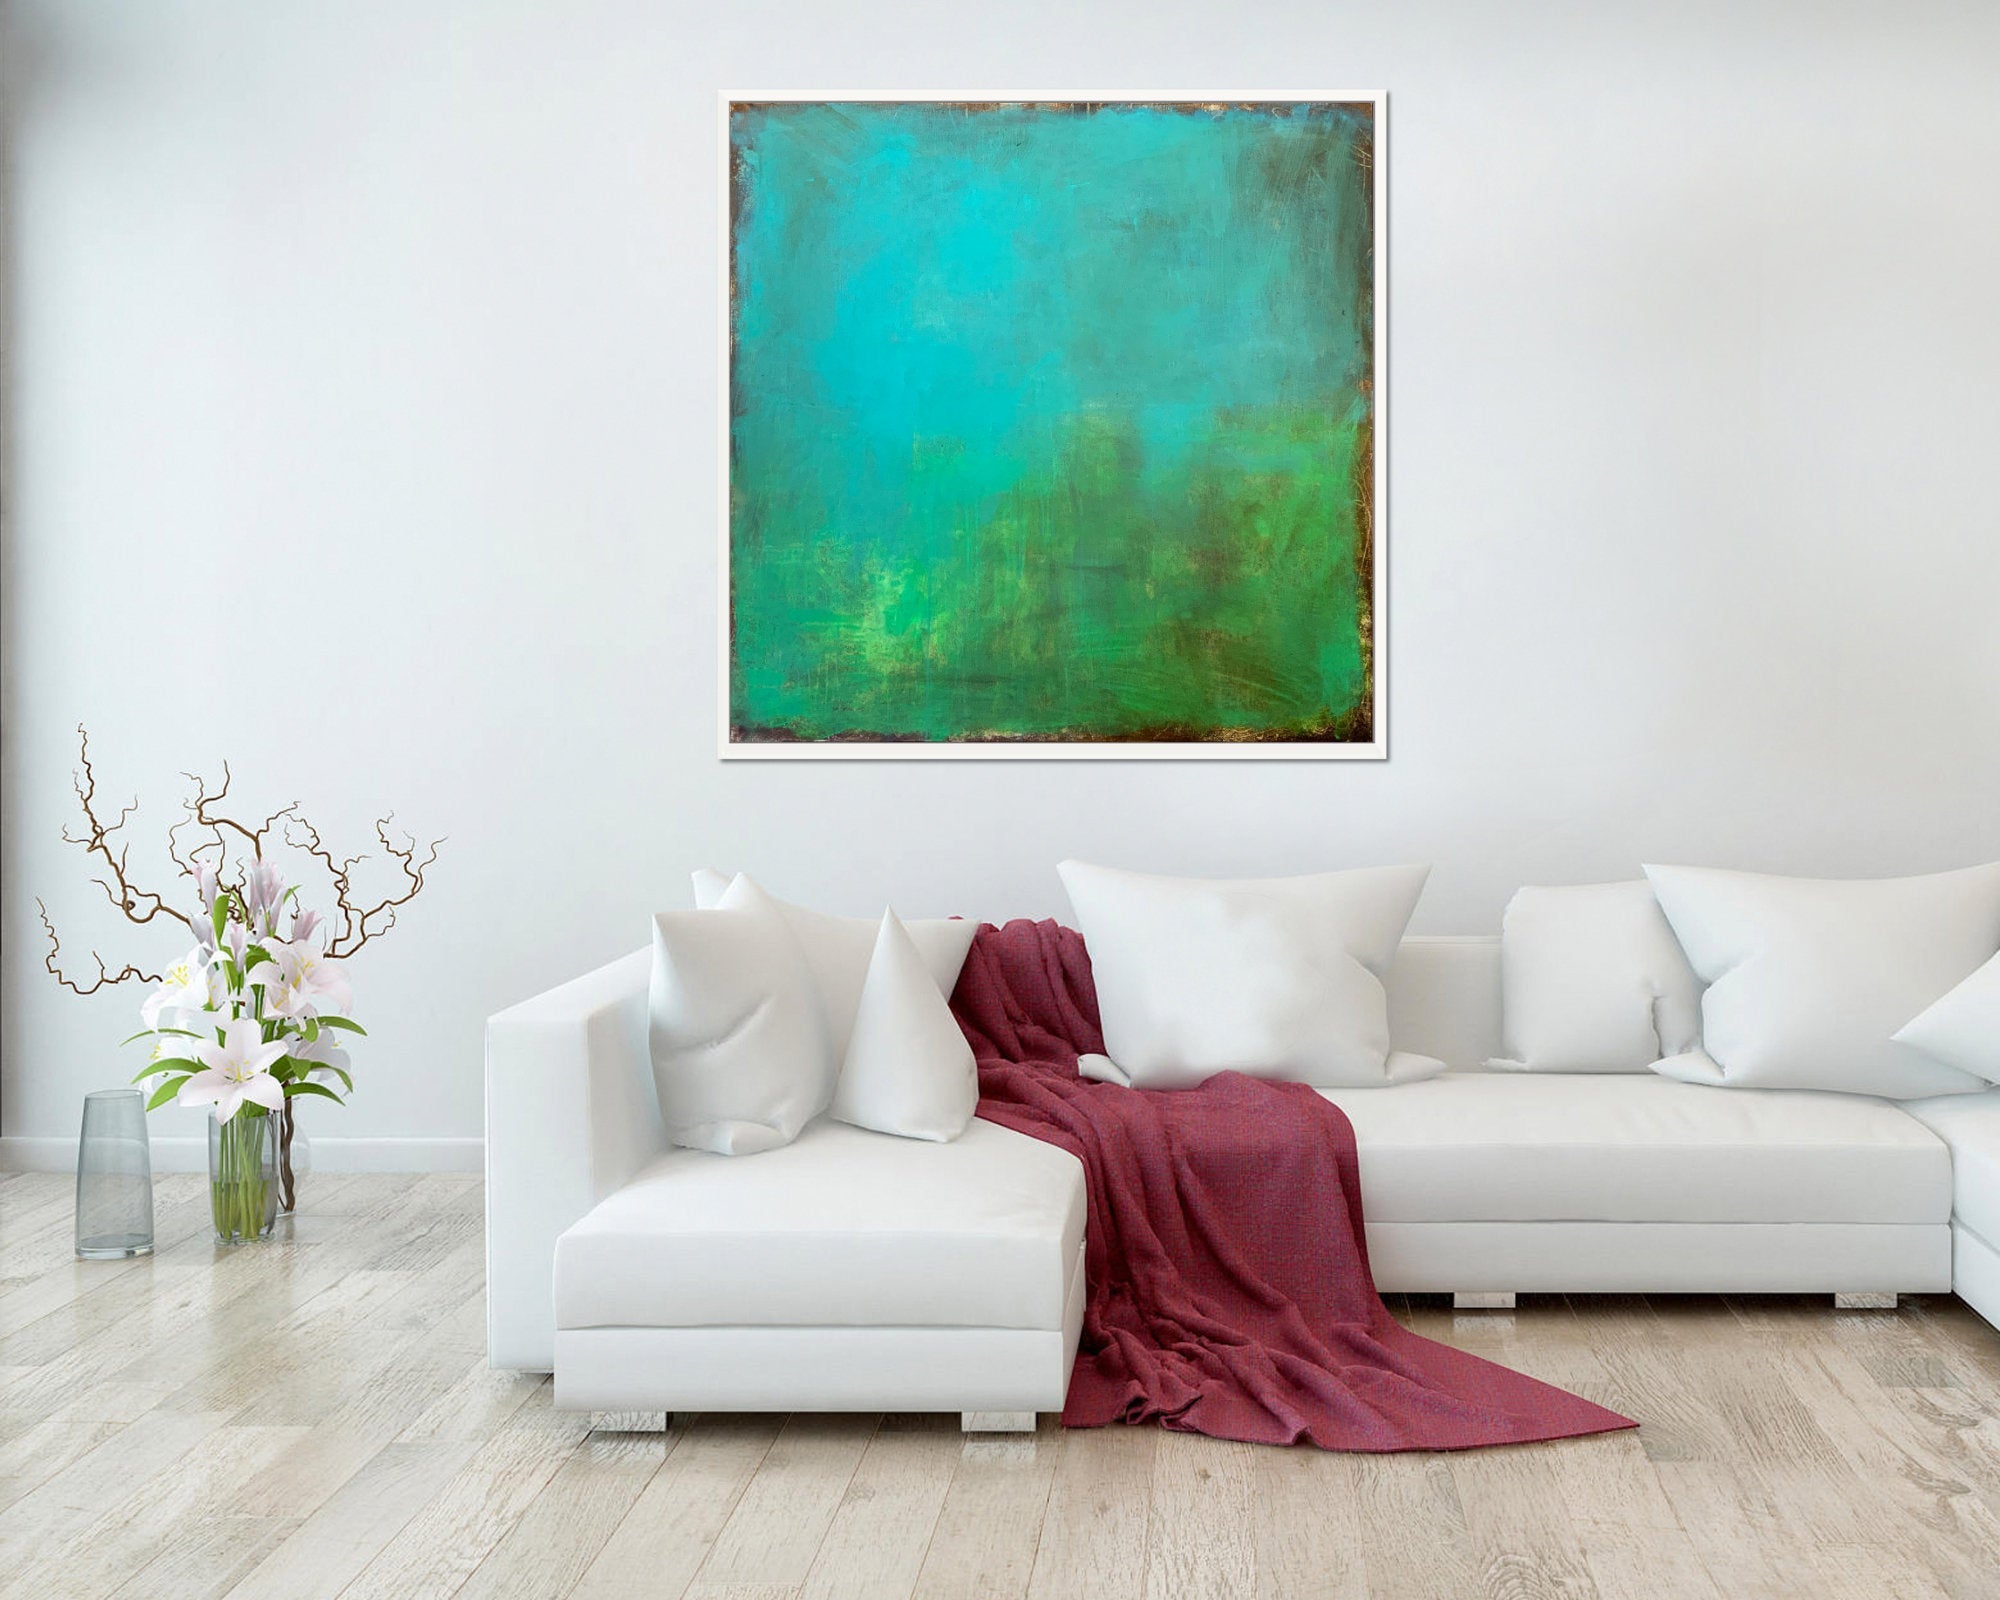 Teal extra large wall art, original abstract art painting on canvas, Teal green fine art, wall art canvas, Teal wall art - camilomattis.com